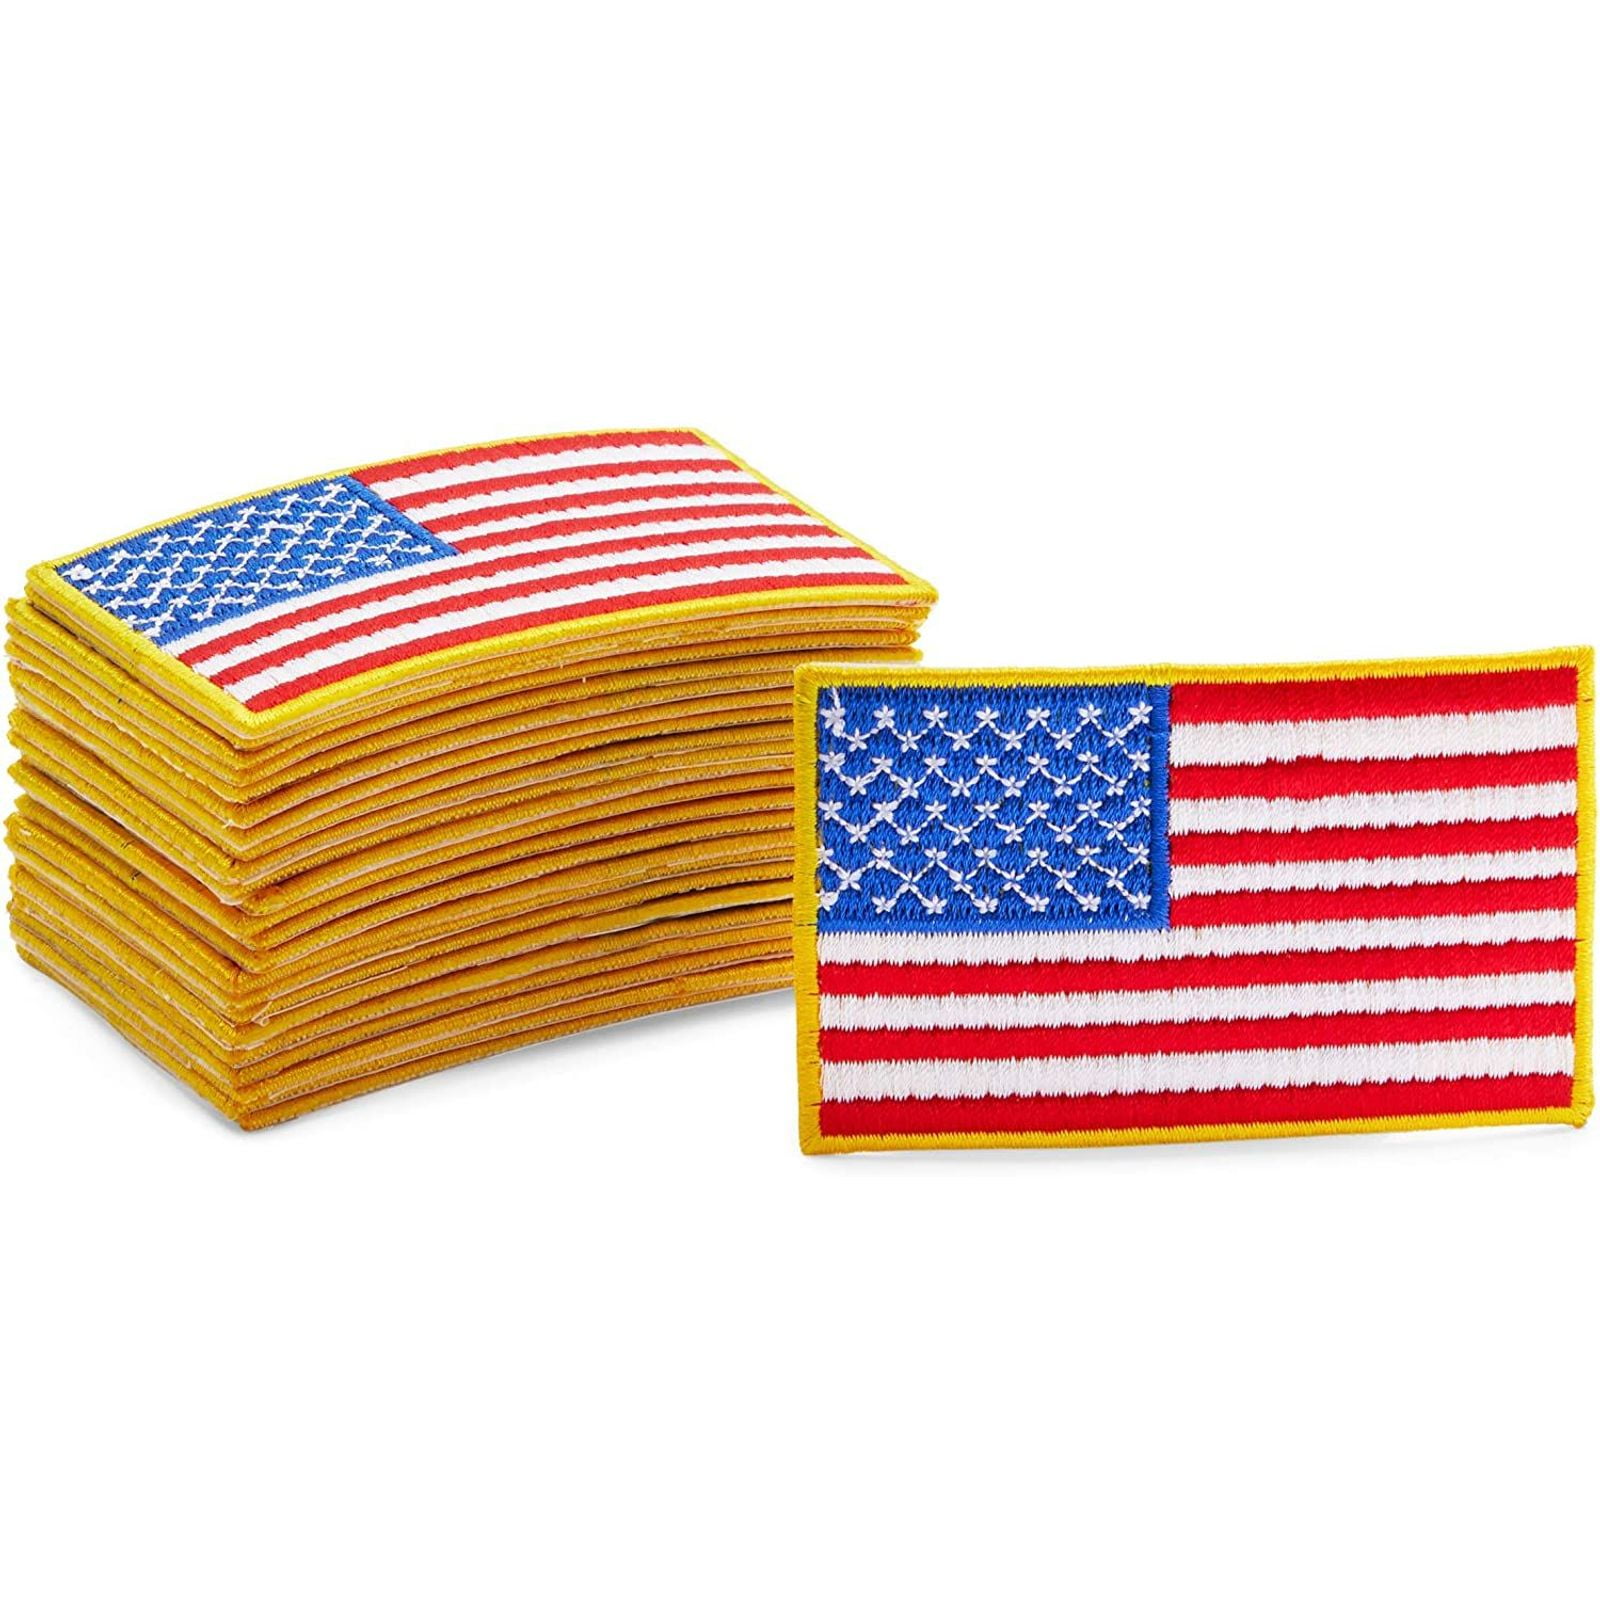 Lot of 10 New American Reversed Military US Flag Embroidered Patch Iron/Sew On 